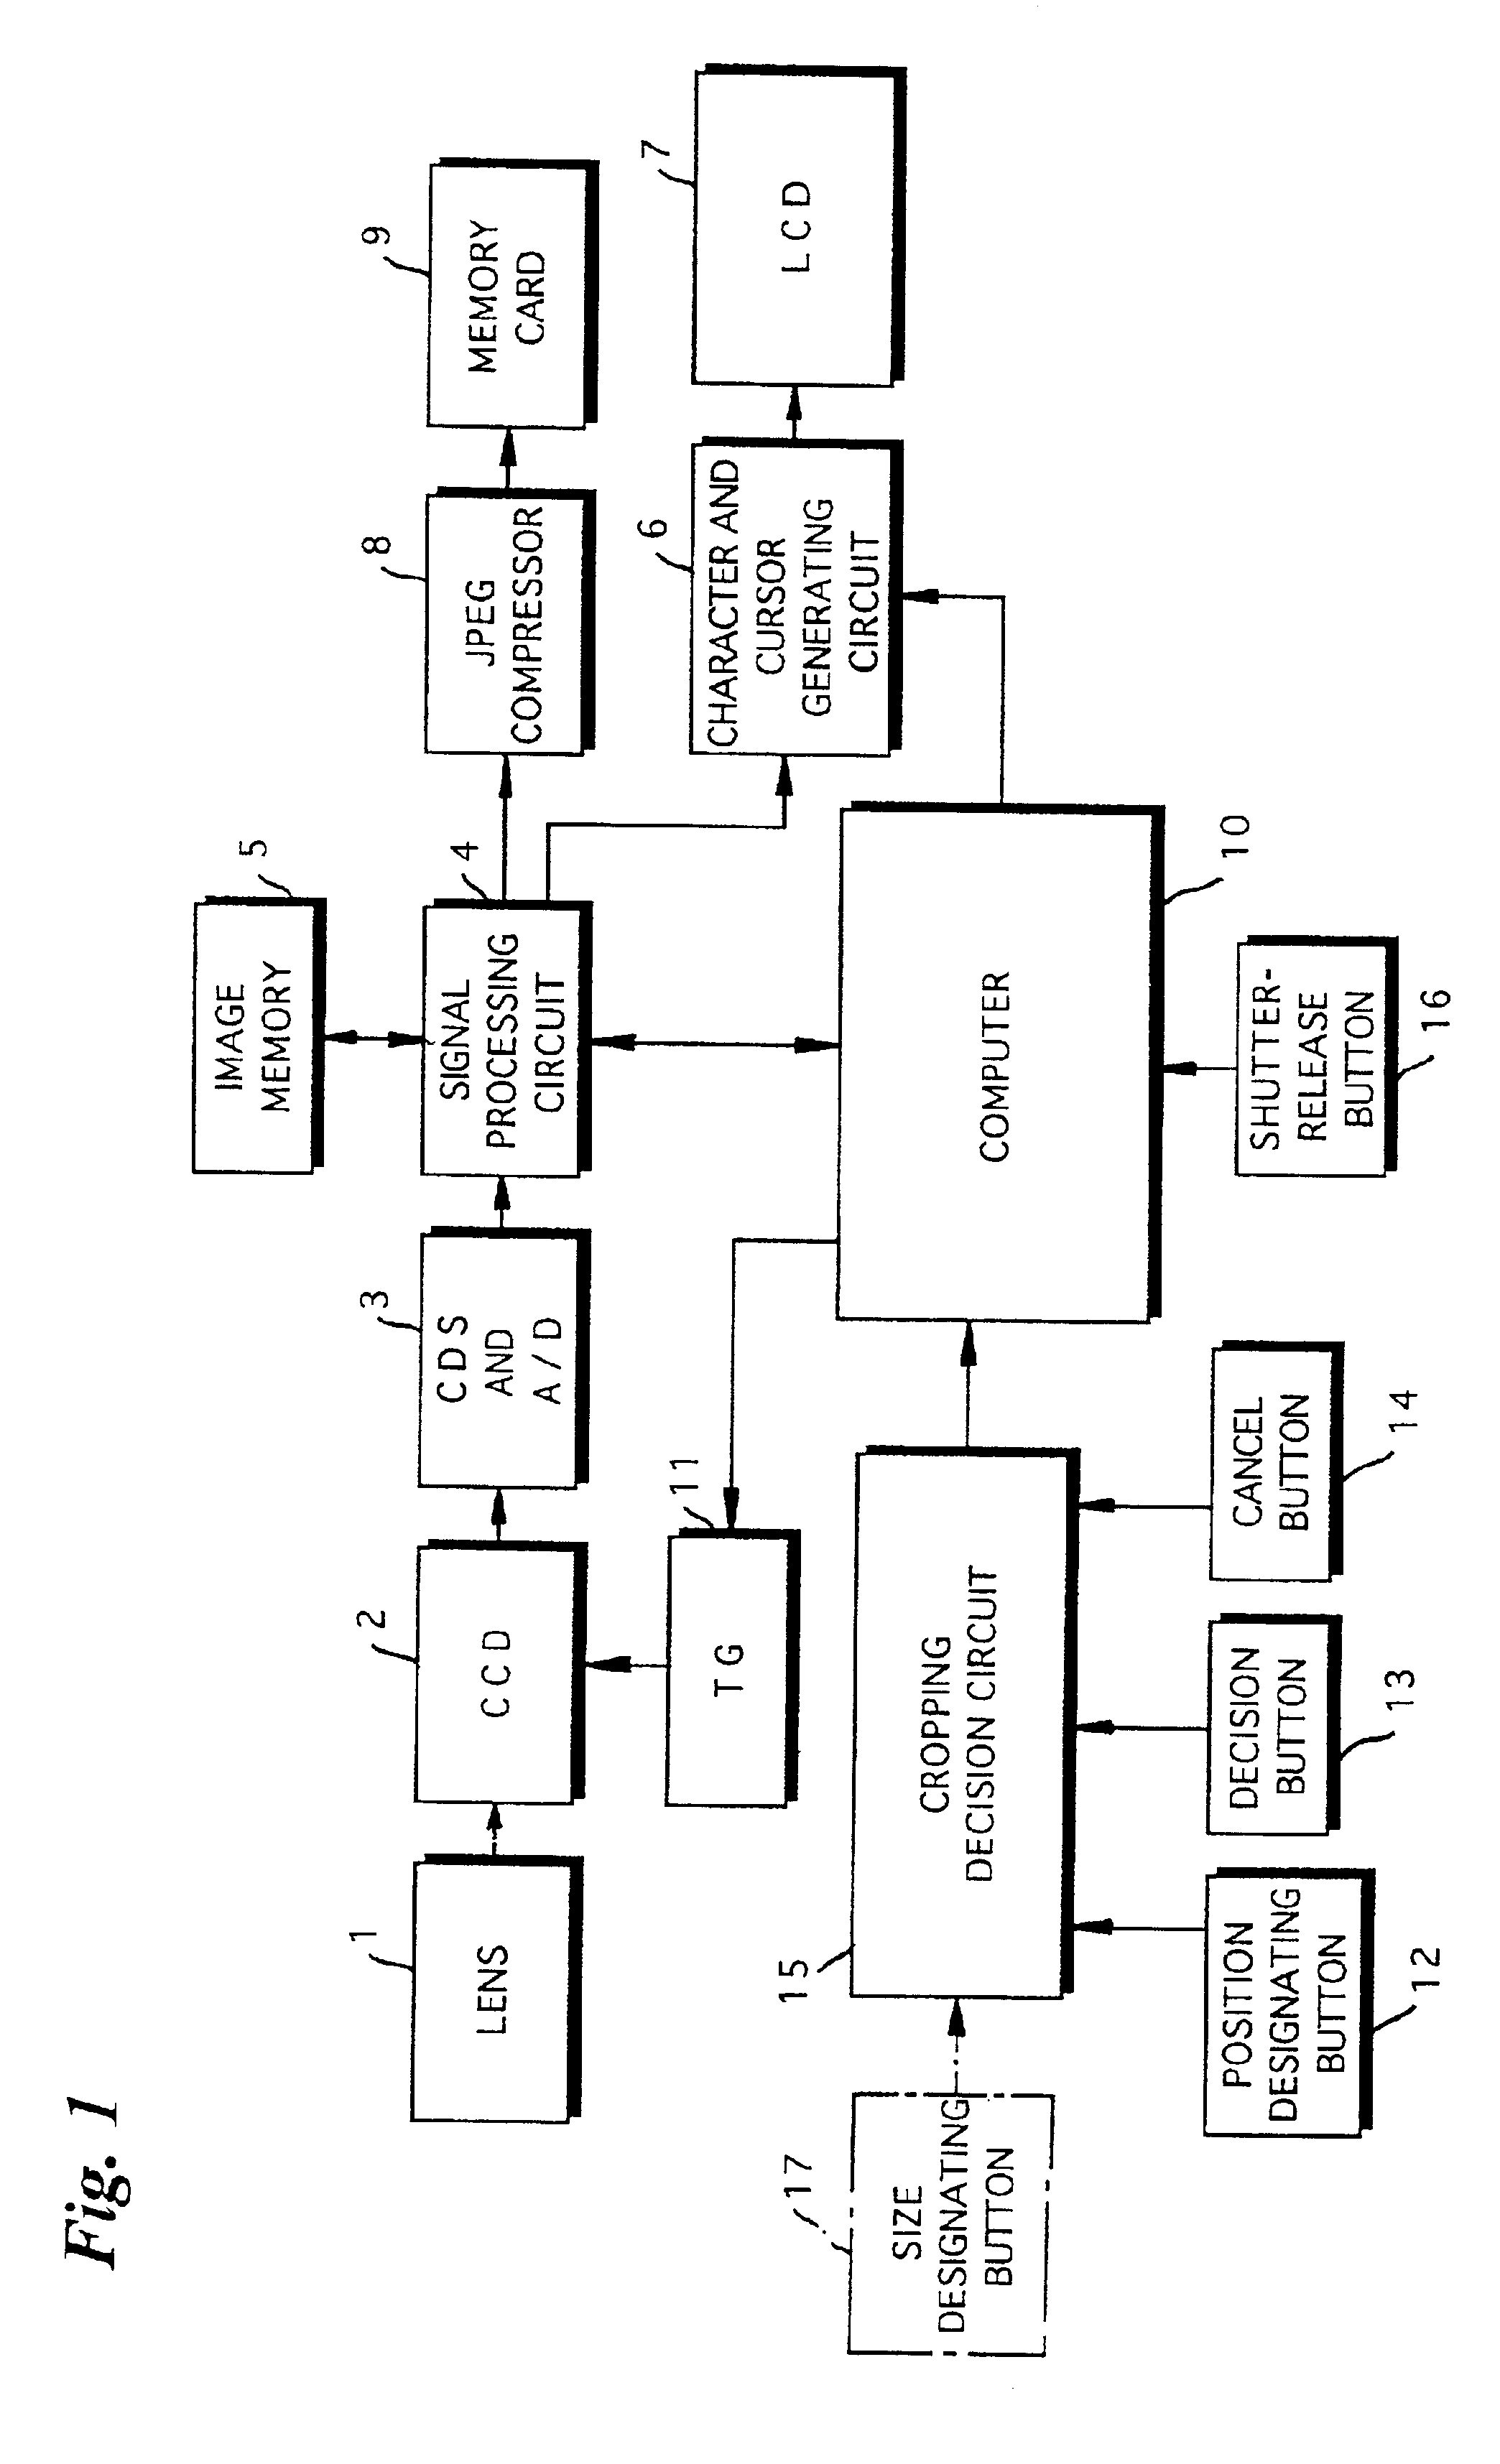 Image sensing system and method of controlling operation of same